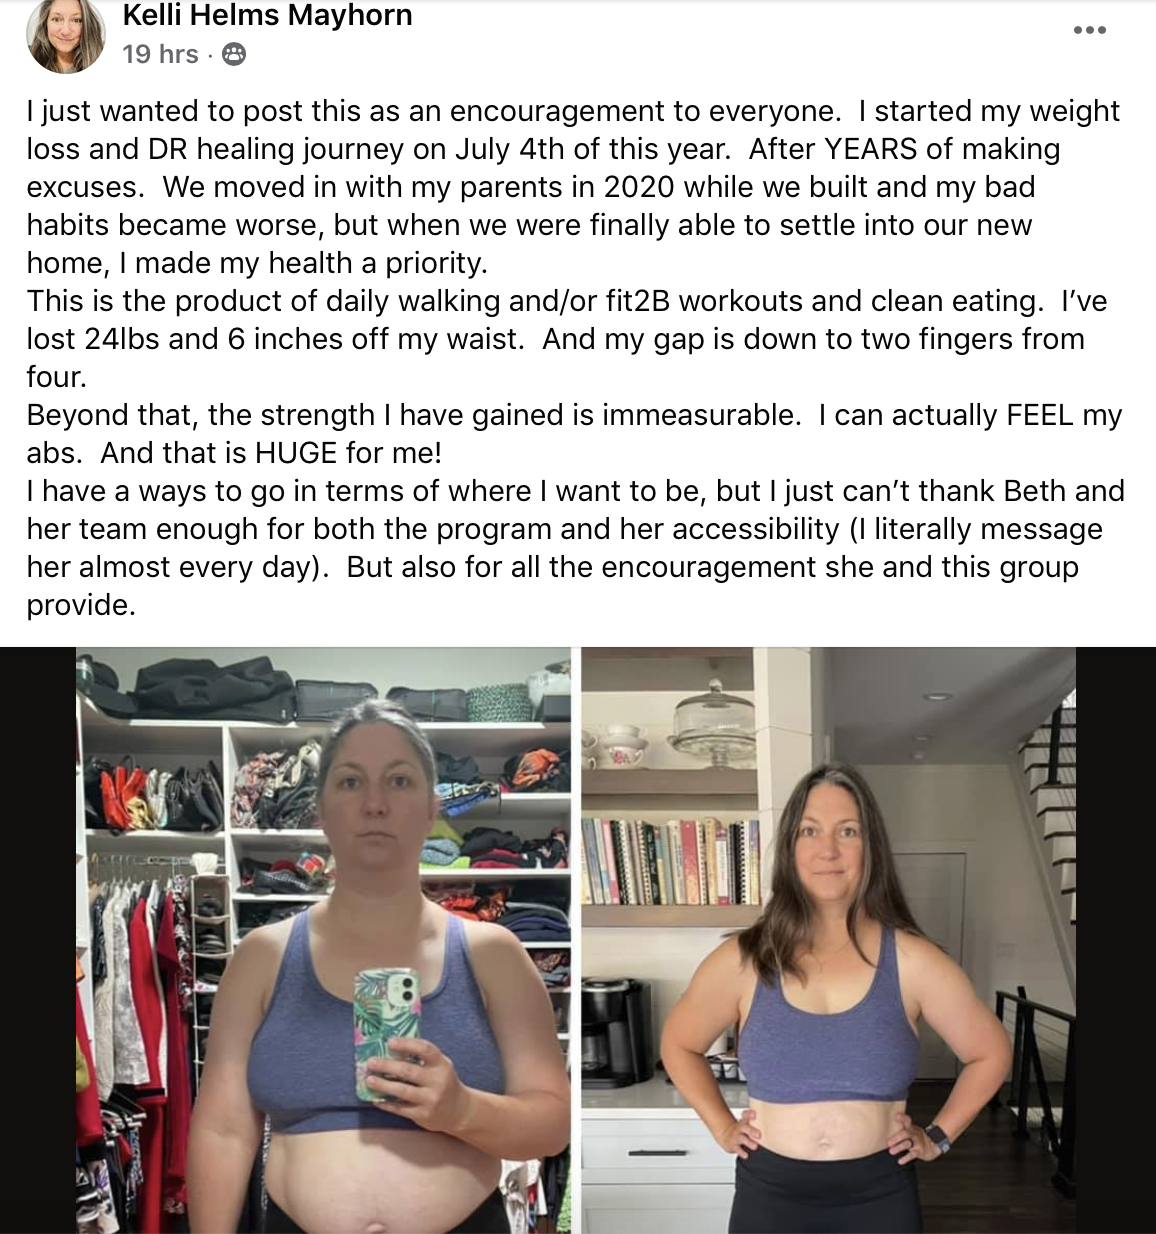 Fit2B Member Testimony: I started my weight loss and Diastasis Recti healing journey on July 4th of this year. After YEARS of making excuses. We moved in with my parents in 2020 while we built and my bad habits became worse, but when we were finally able to settle into our new home, I made my health a priority. This is the product of daily walking and/or fit2B workouts and clean eating. I’ve lost 24lbs and 6 inches off my waist. And my gap is down to two fingers from four. Beyond that, the strength I have gained is immeasurable. I can actually FEEL my abs. And that is HUGE for me! I have a ways to go in terms of where I want to be, but I just can’t thank Beth and her team enough for both the program and her accessibility (I literally message her almost every day). But also for all the encouragement she and this group provide." -Kelly Mayhorn